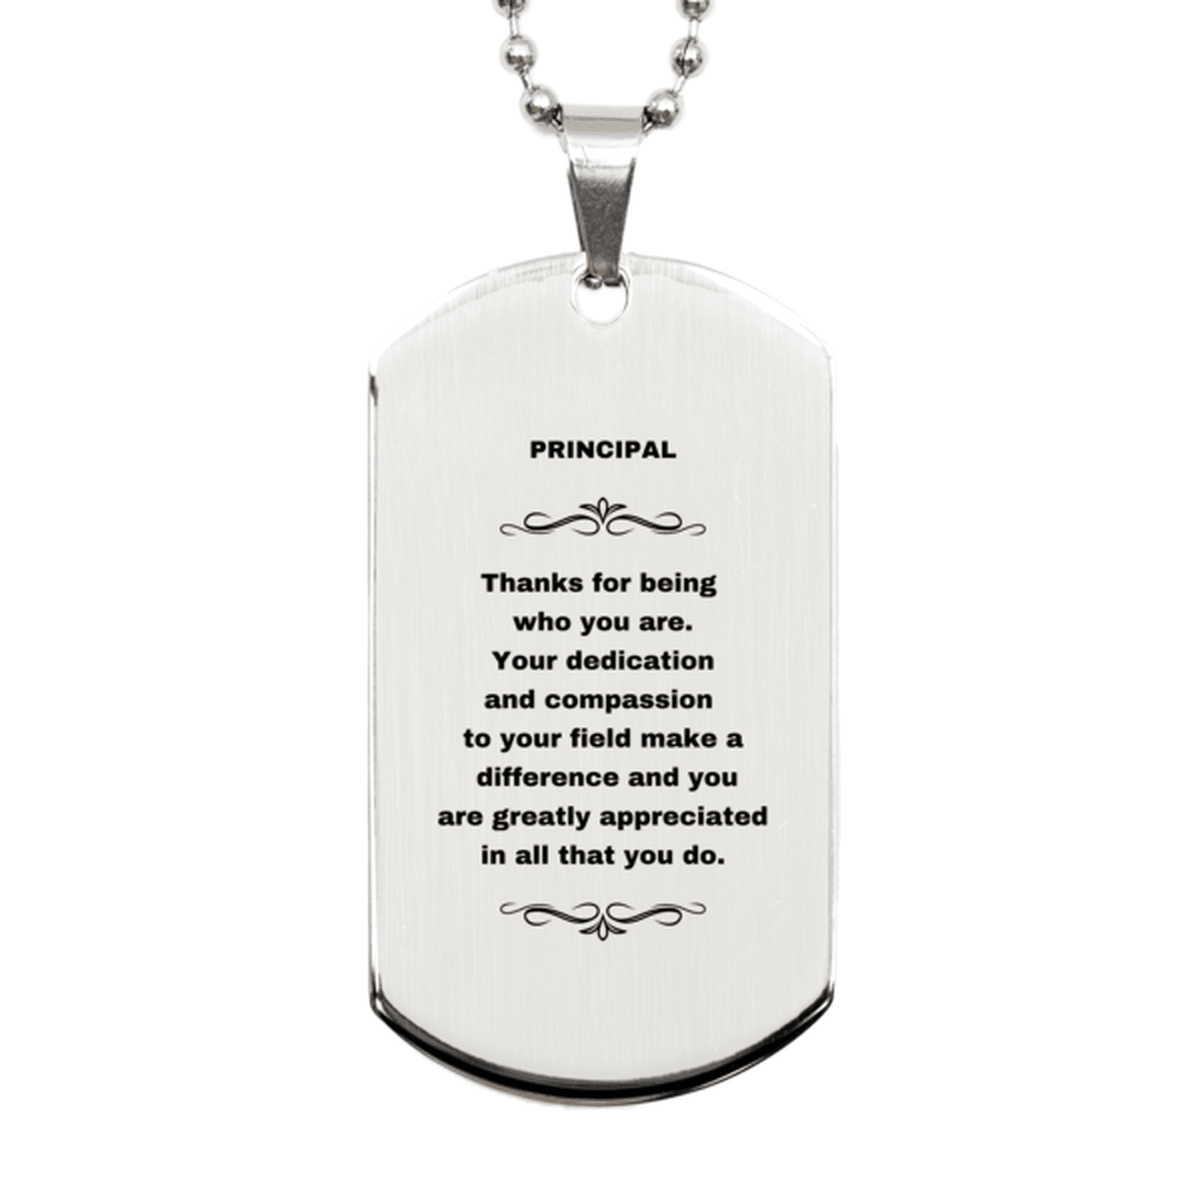 Principal Silver Dog Tag Engraved Necklace - Thanks for being who you are - Birthday Christmas Jewelry Gifts Coworkers Colleague Boss - Mallard Moon Gift Shop